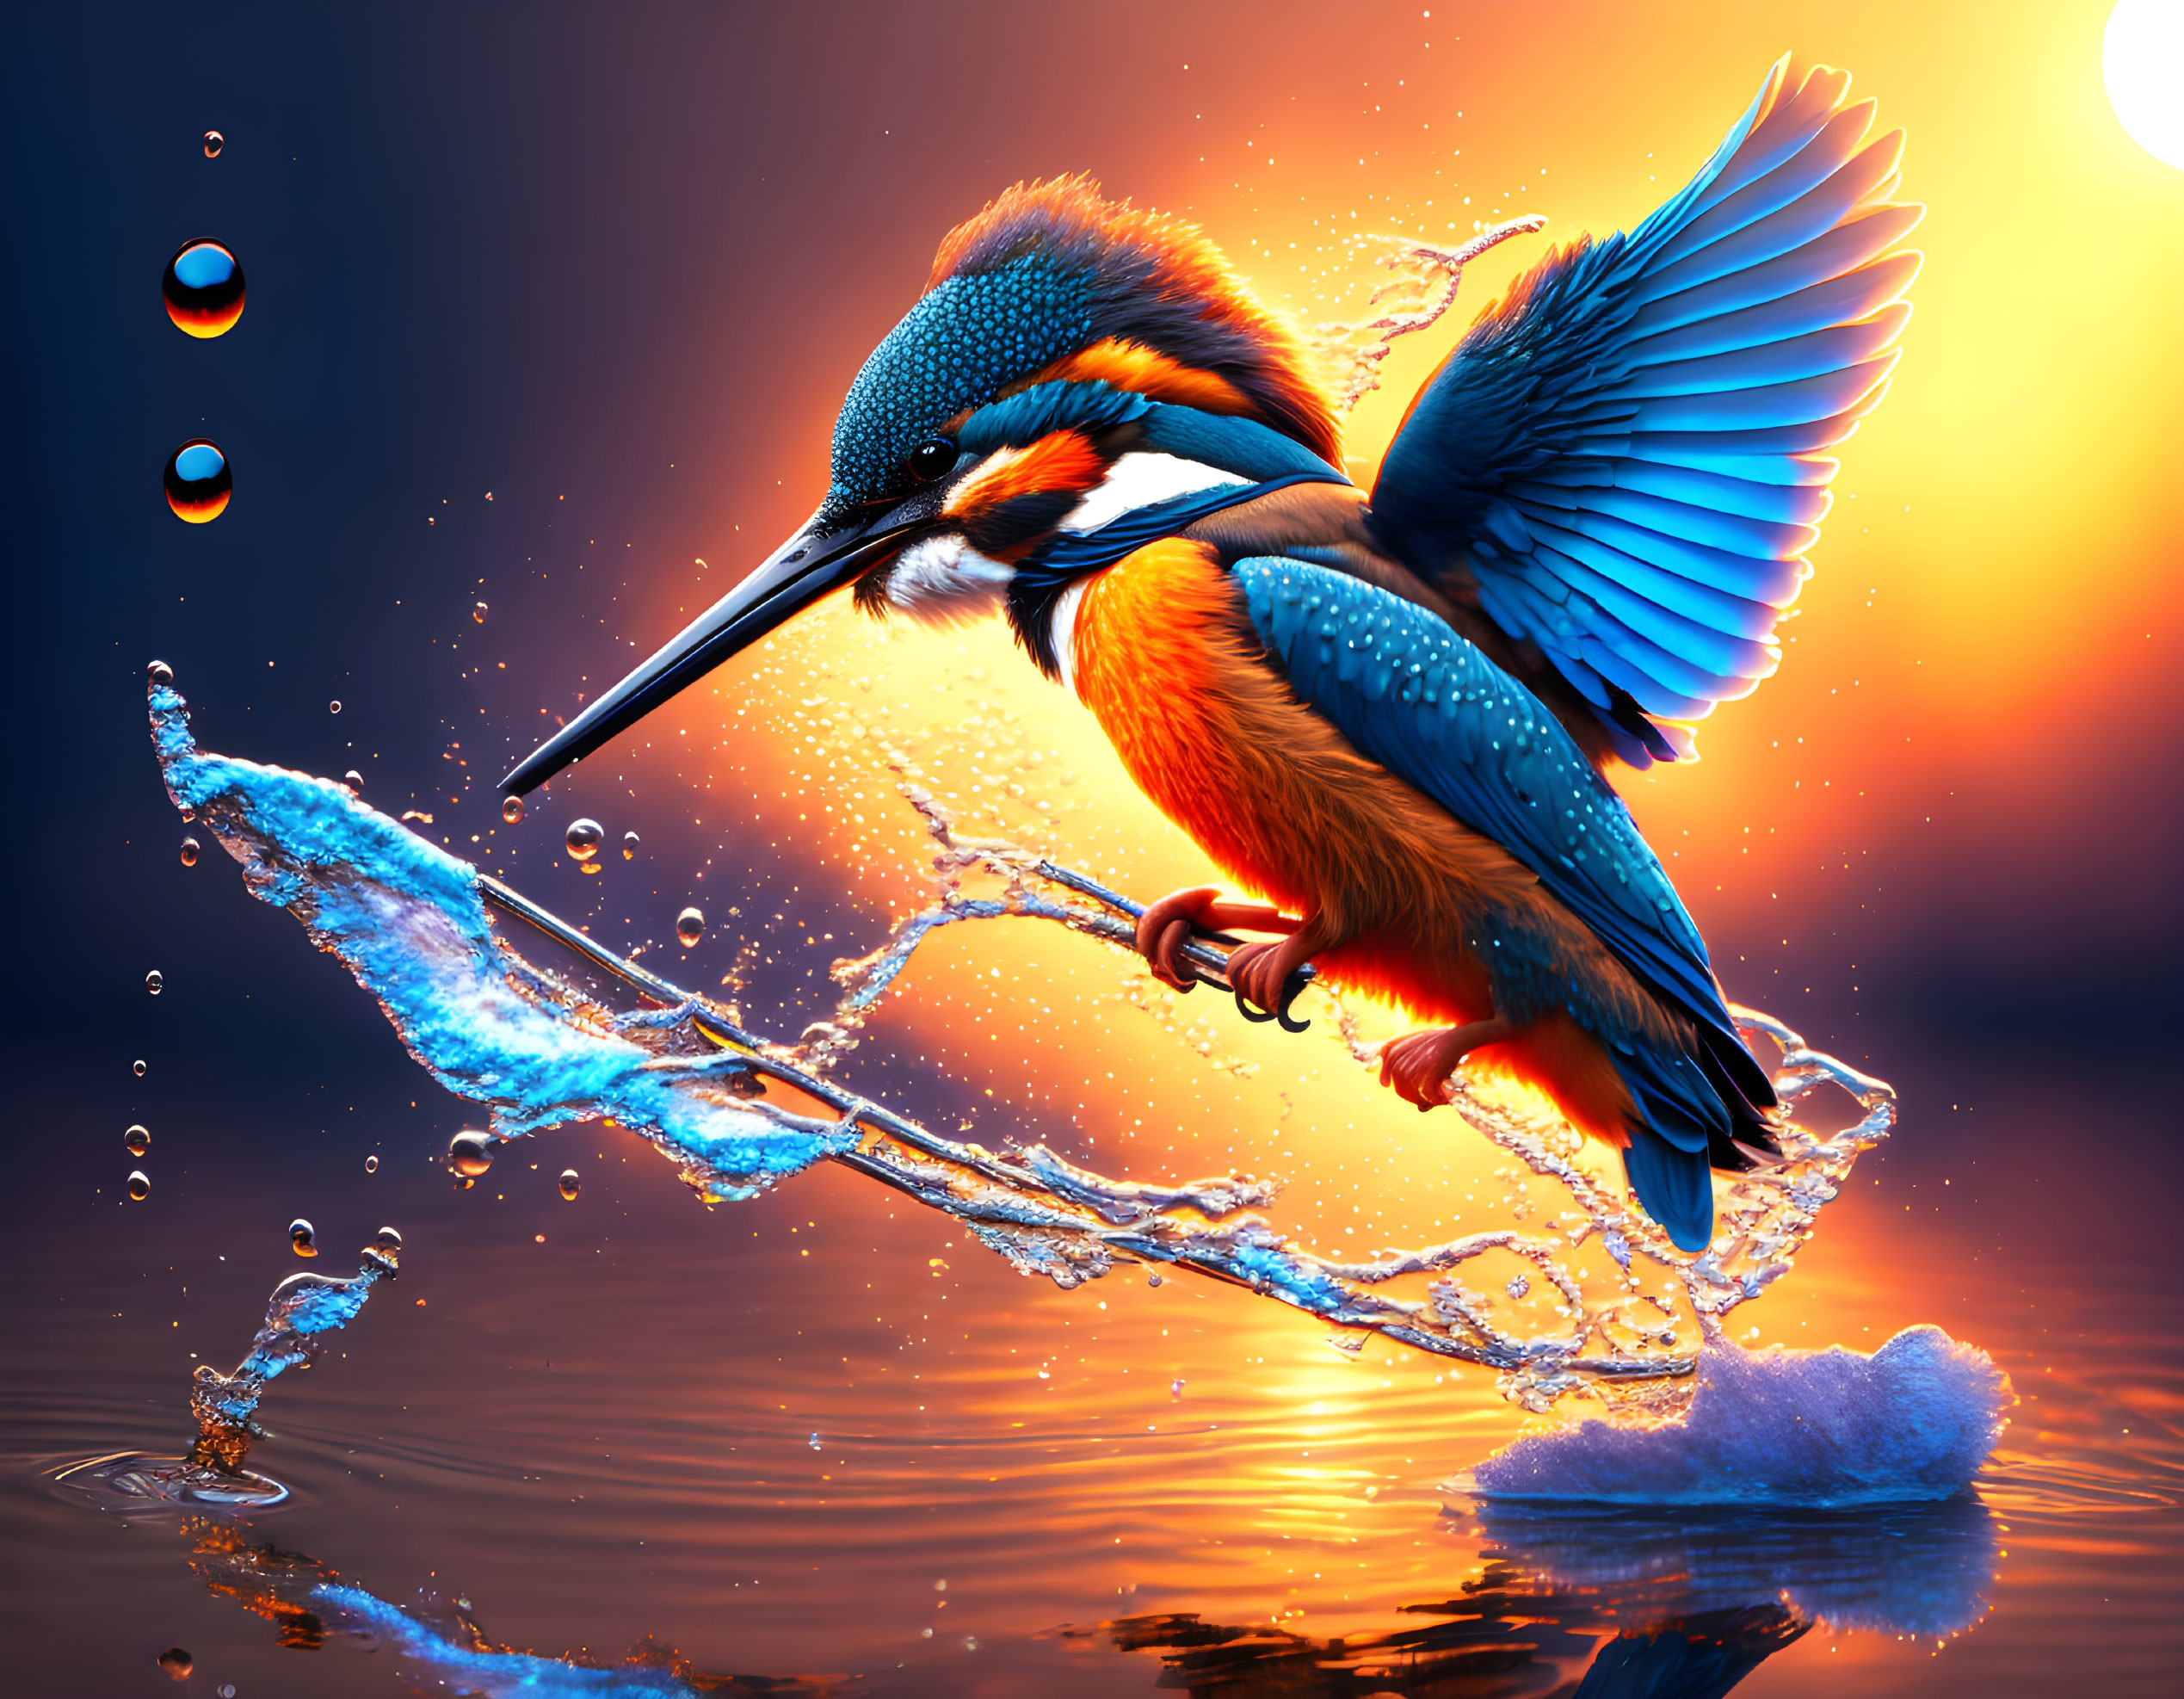 One Kingfisher Fishing - A Magical and Surreal Mas